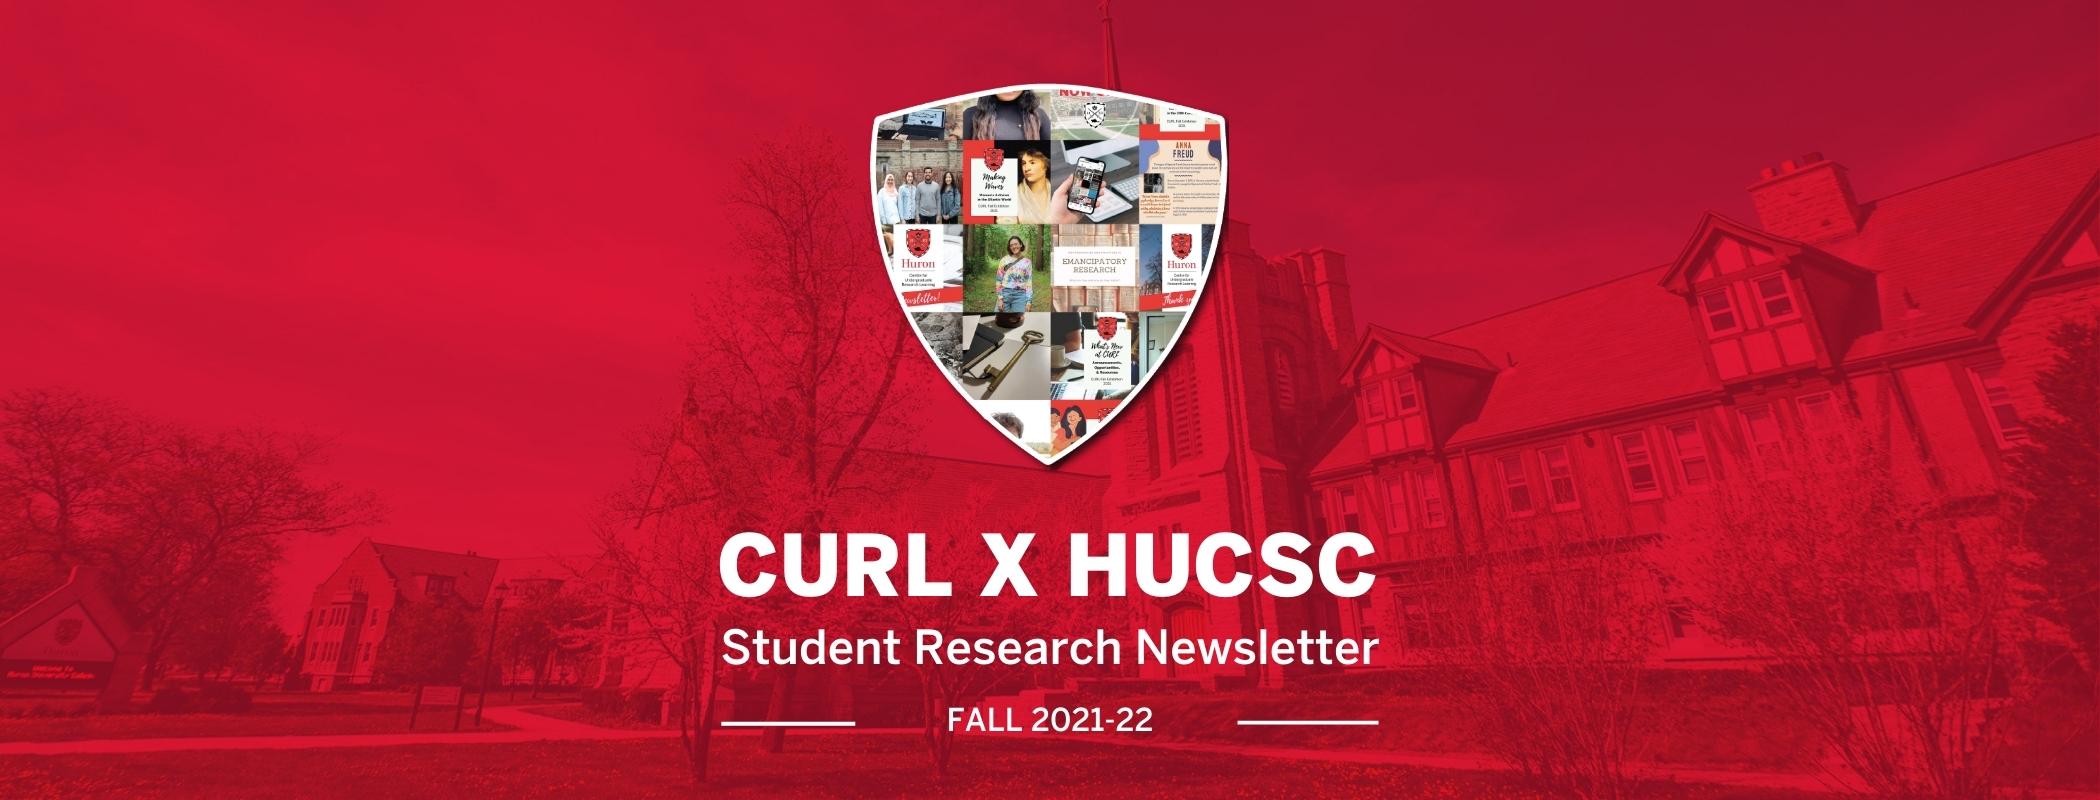 On top of a background featuring the Huron building, text reads, "CURL x HUCSC Student Research Journal." Above the text is a collage of CURL and HUCSC instagram posts arranged into the shape of a shield.